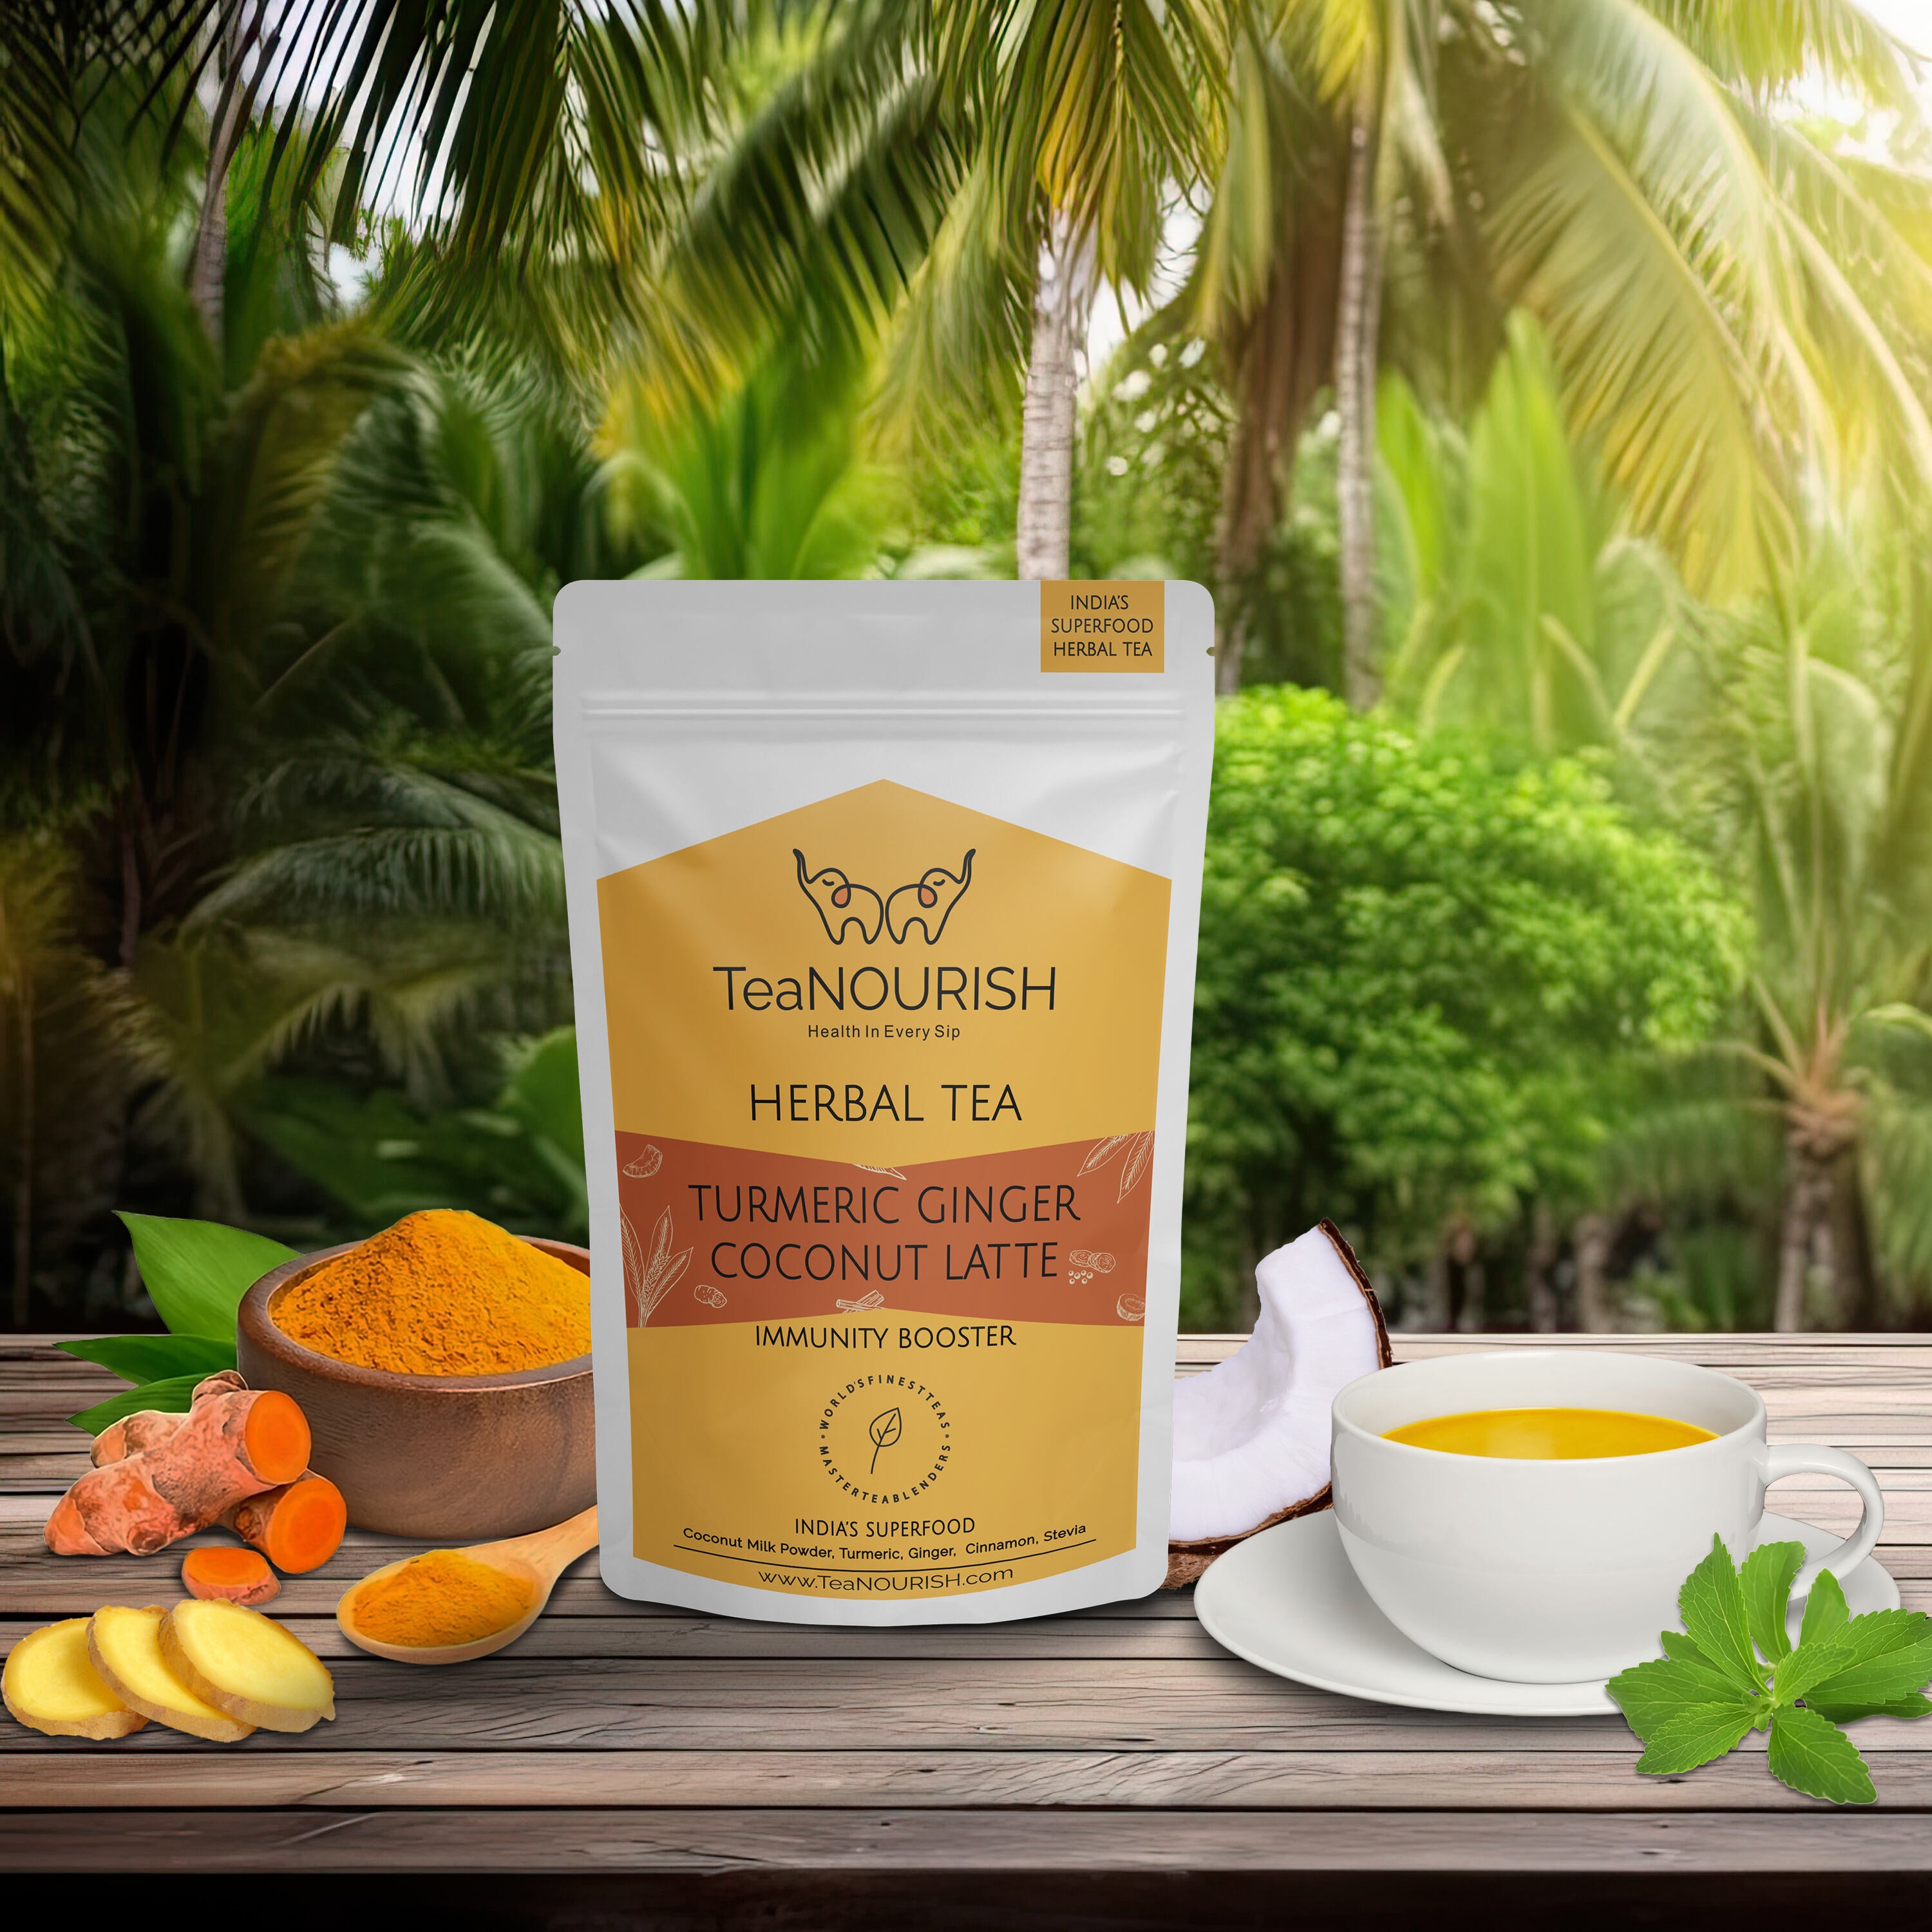 Turmeric Ginger Coconut Latte Product Picture